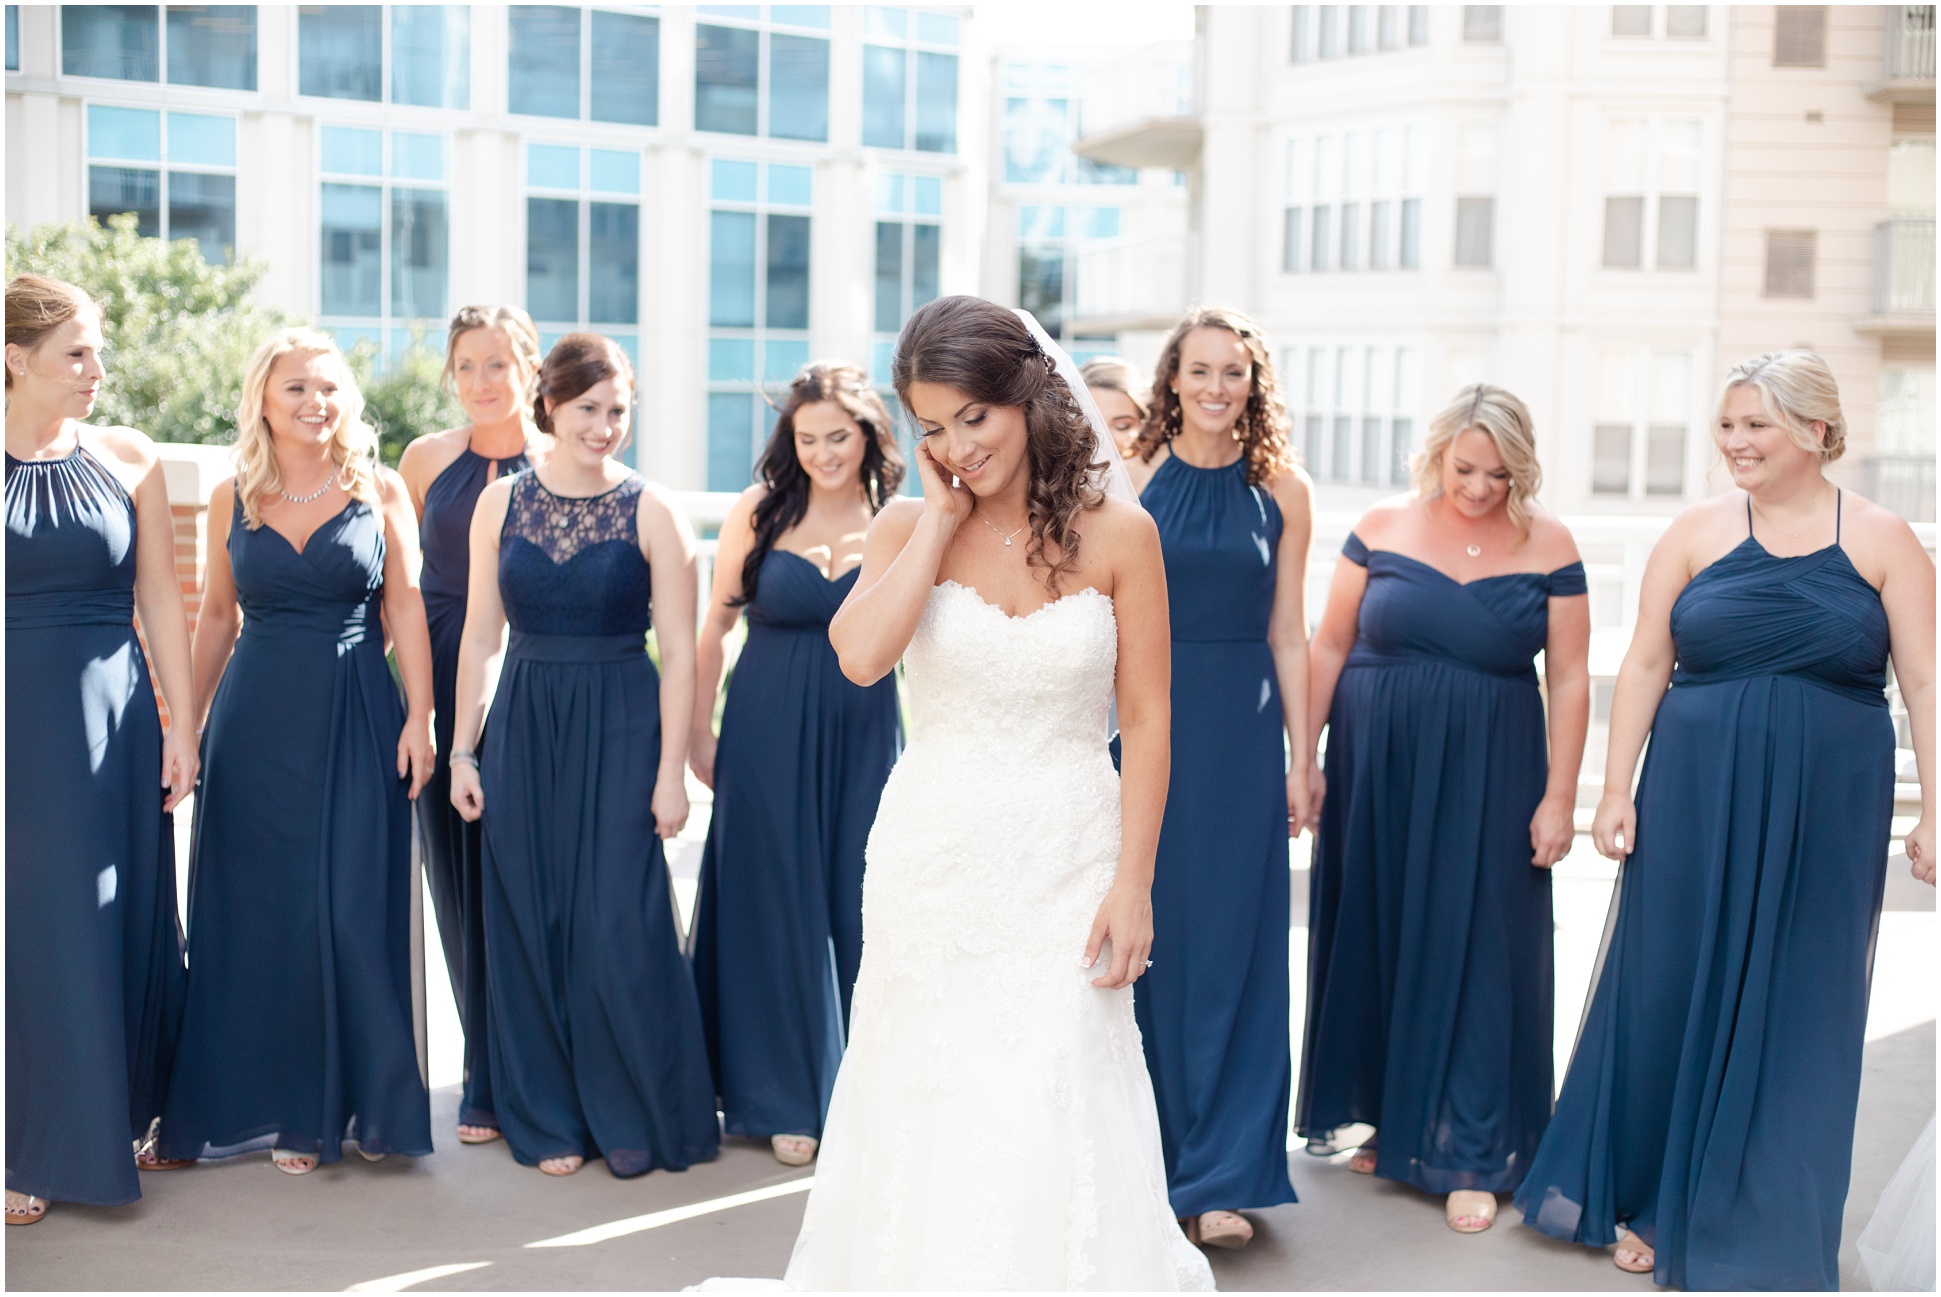 Bridesmaids and Bride walking on the patio of the hotel. Bridesmaids wearing long blue dresses